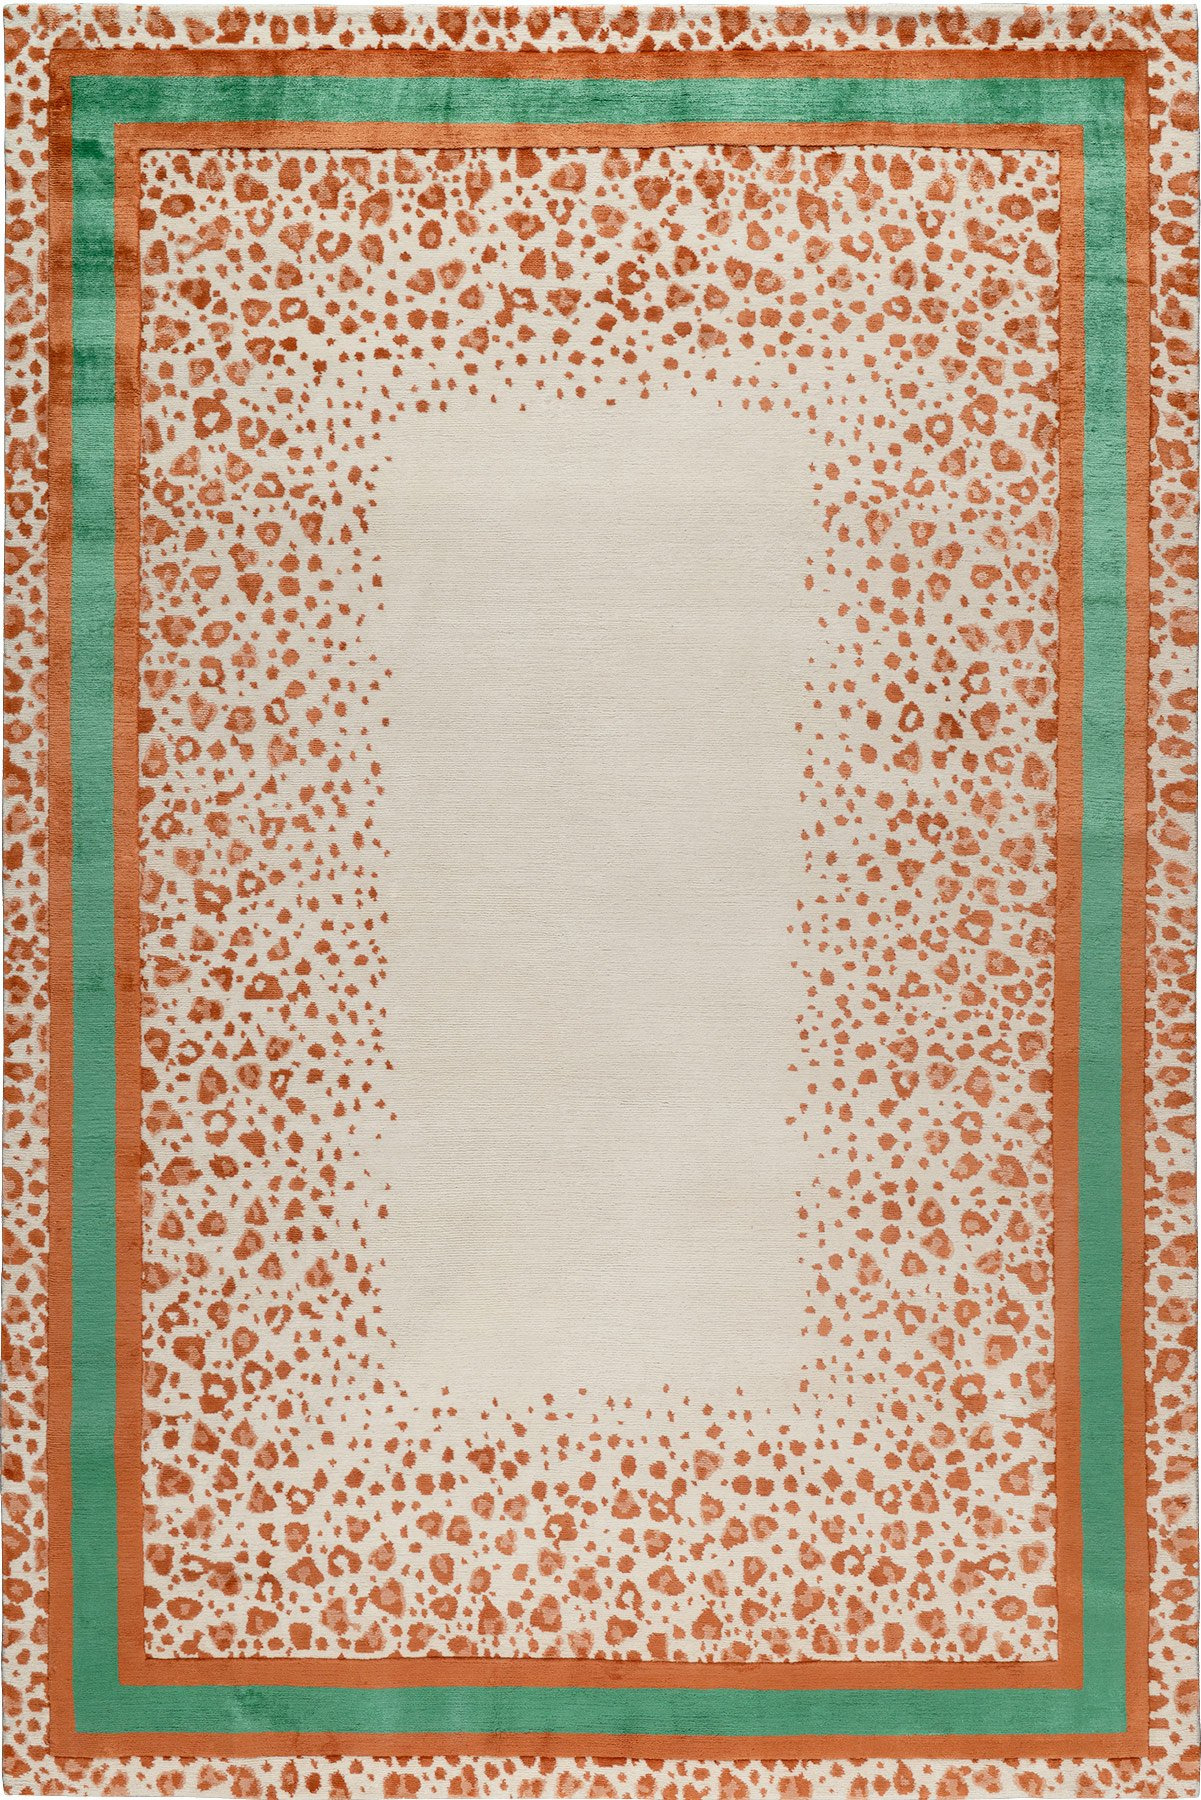 Patterned area rug with inner borger in green and organo-animal print in rusty orange